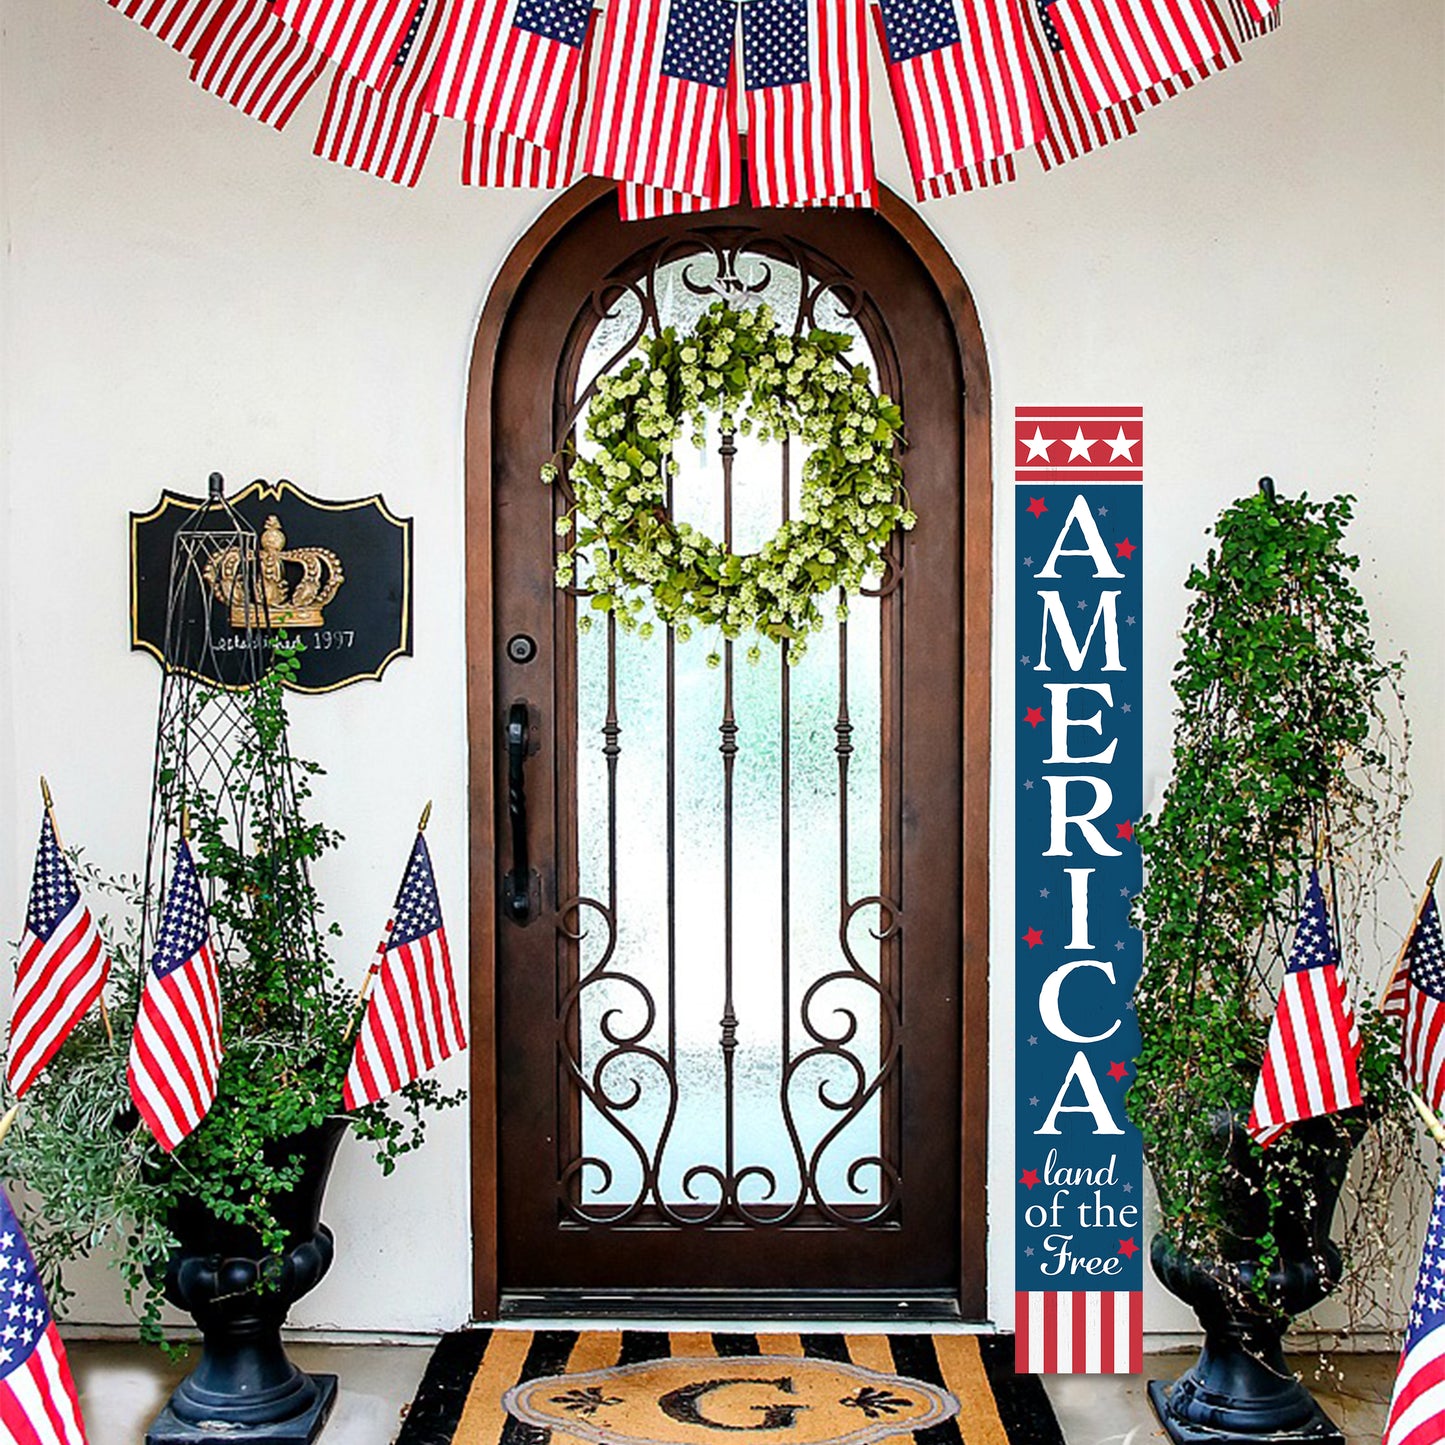 72in 4th of July America Land of the Free Sign | Patriotic Wooden Porch Decor | Vertical Stars & Stripes | Independence Day Outdoor Decor